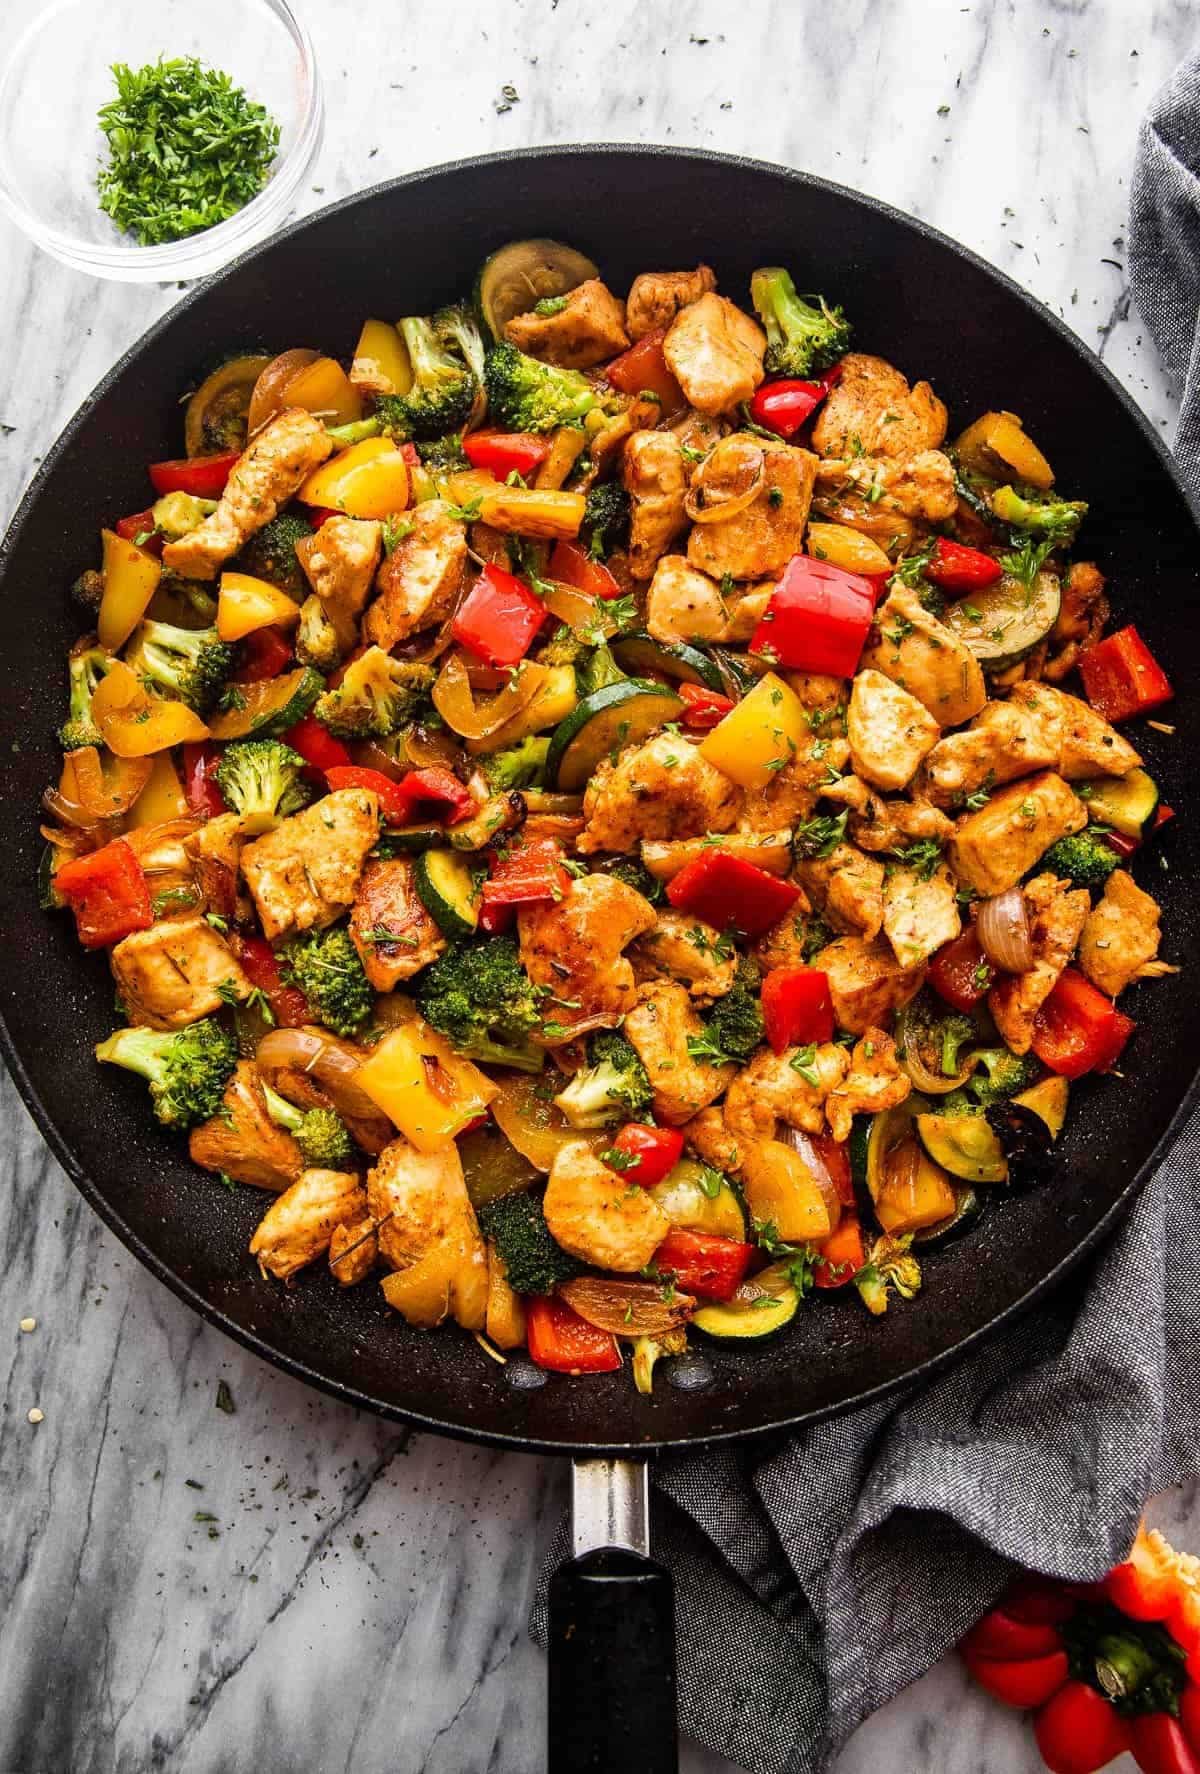 Gluten-Free Chicken and Vegetables in a black pan.